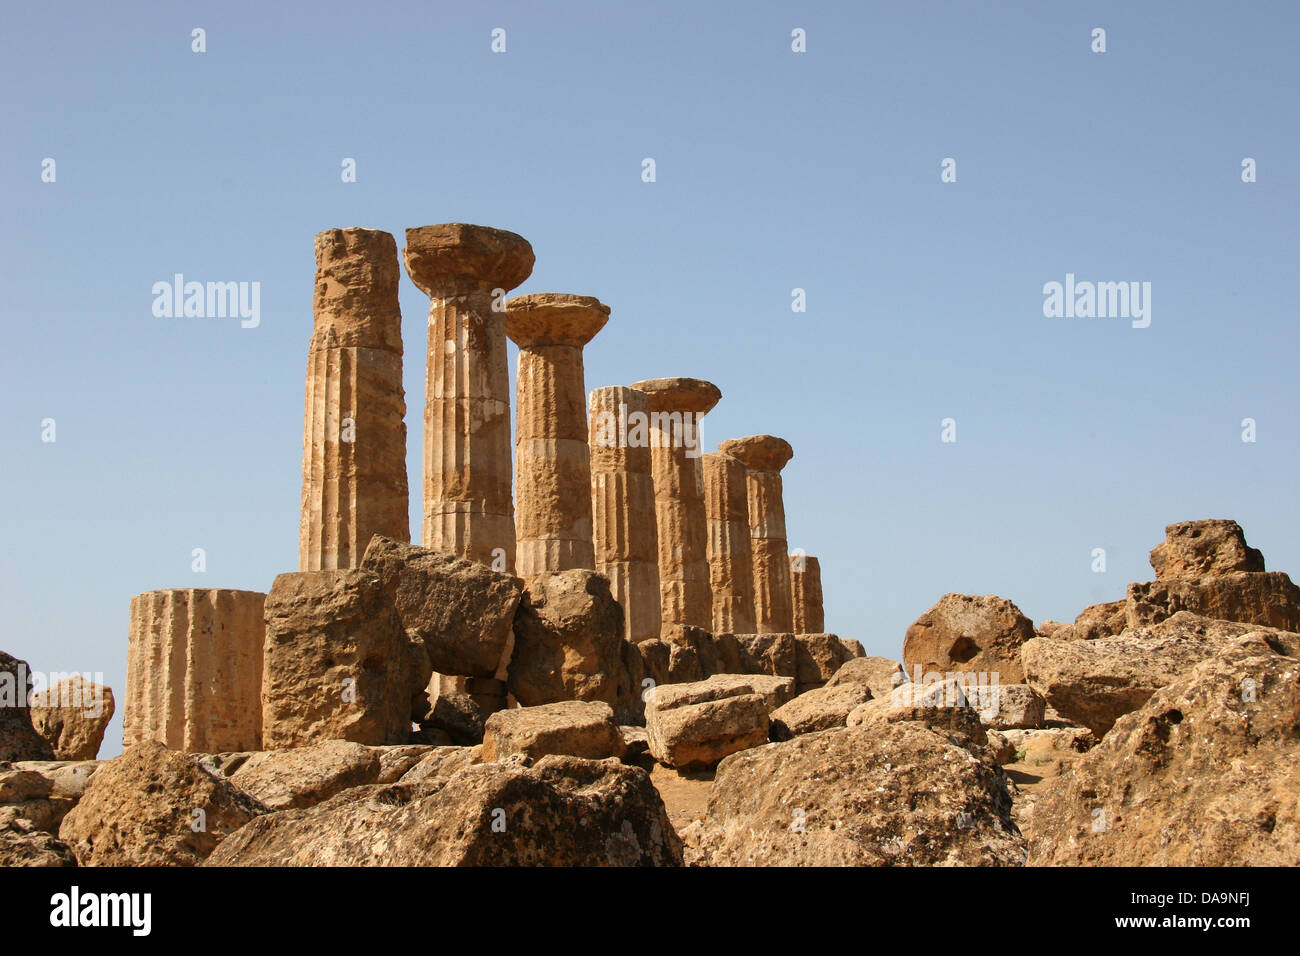 Italy, Europe, Sicily, Agrigento, Heracles, temple, antiquity, archeology, Greek columns, columns Stock Photo